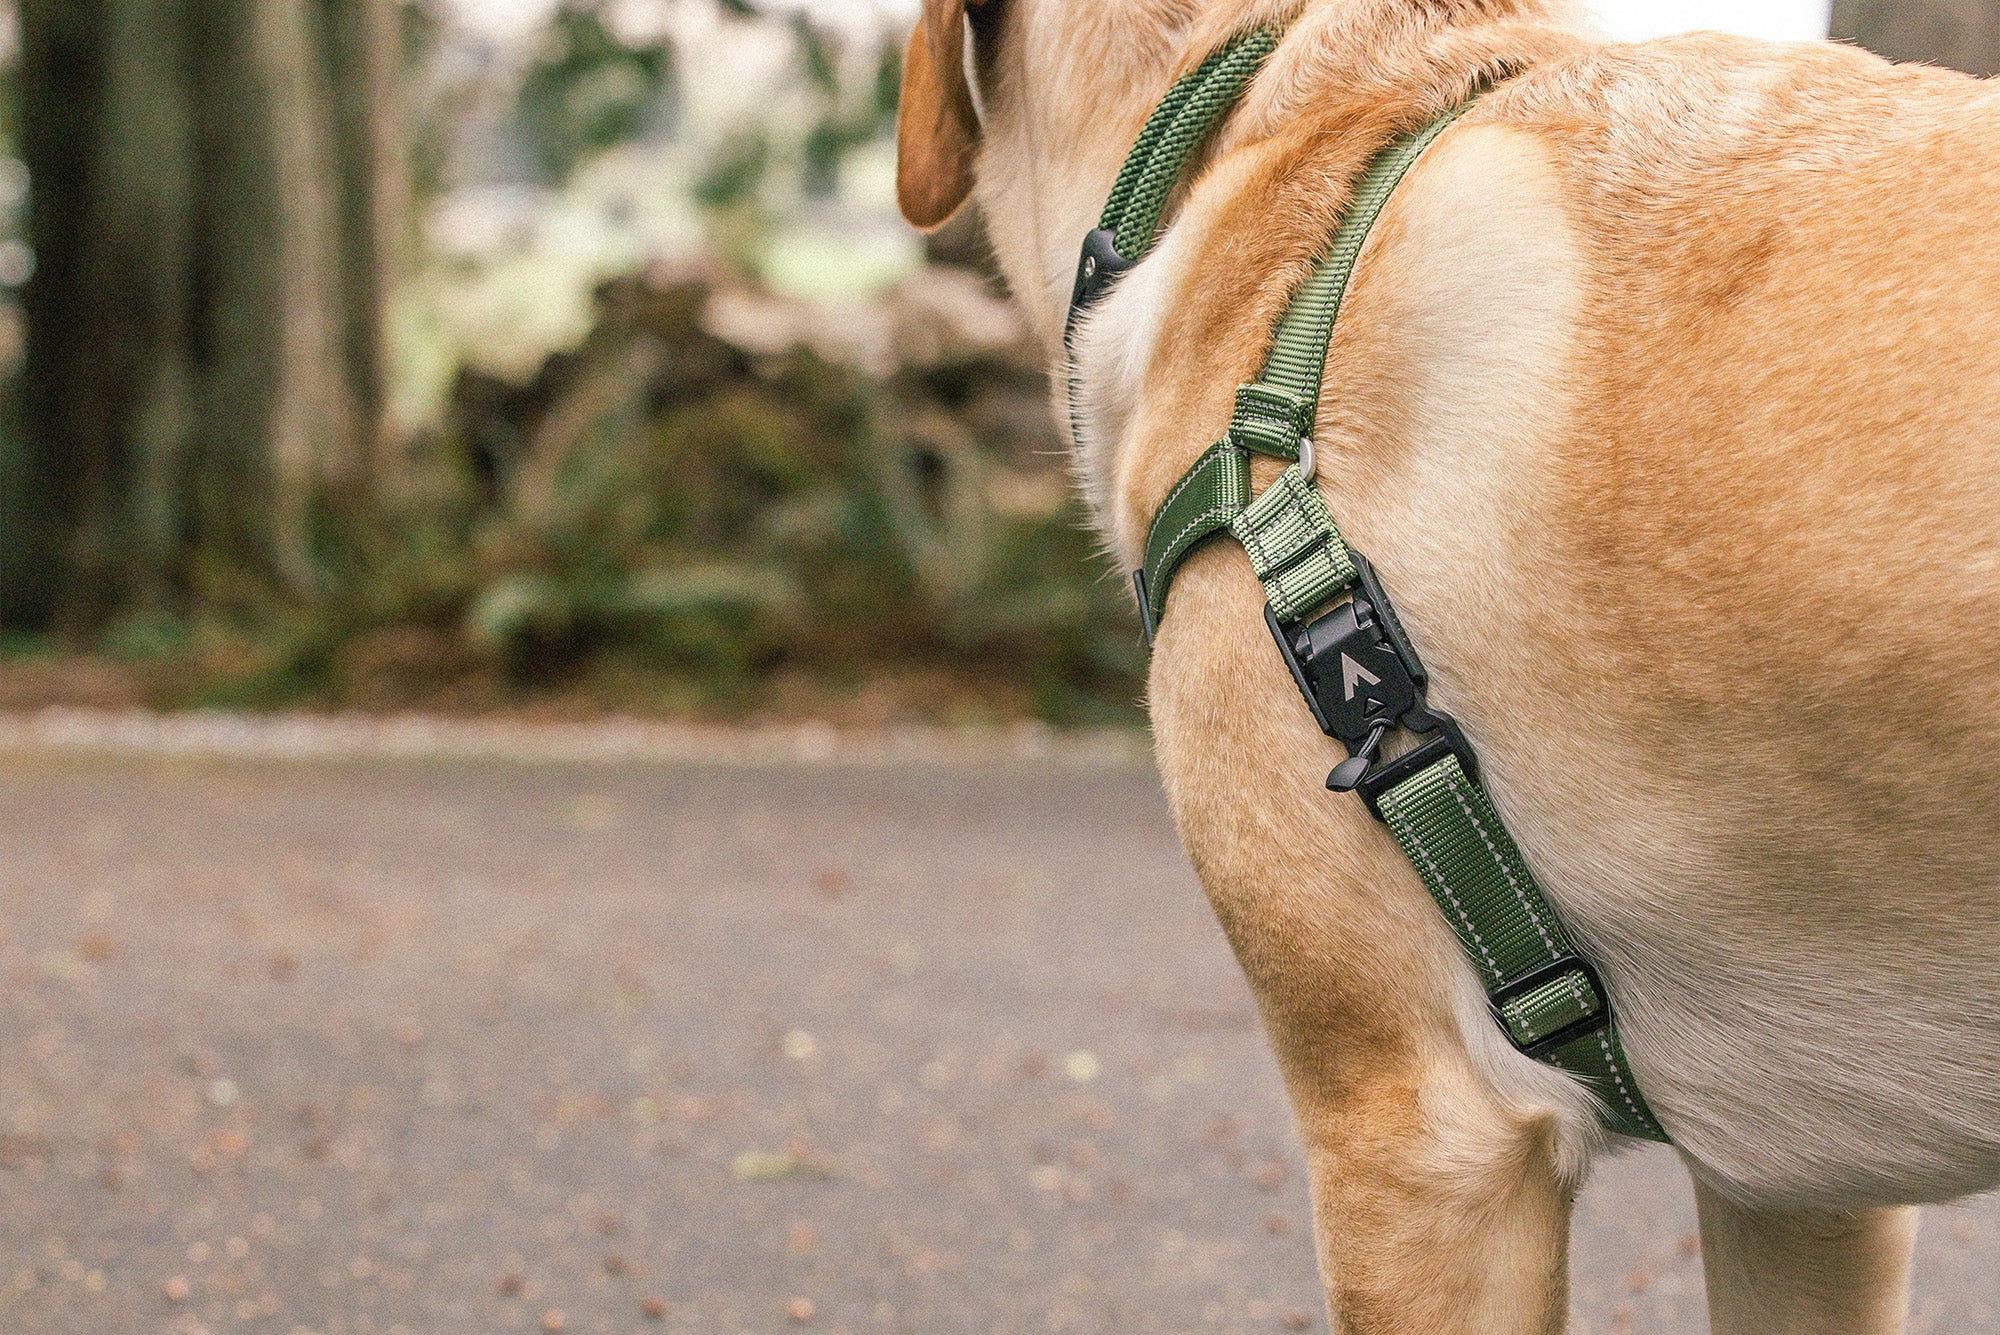 dog wearing the atlas pet company lifetime harness with magnetic fid lock buckle